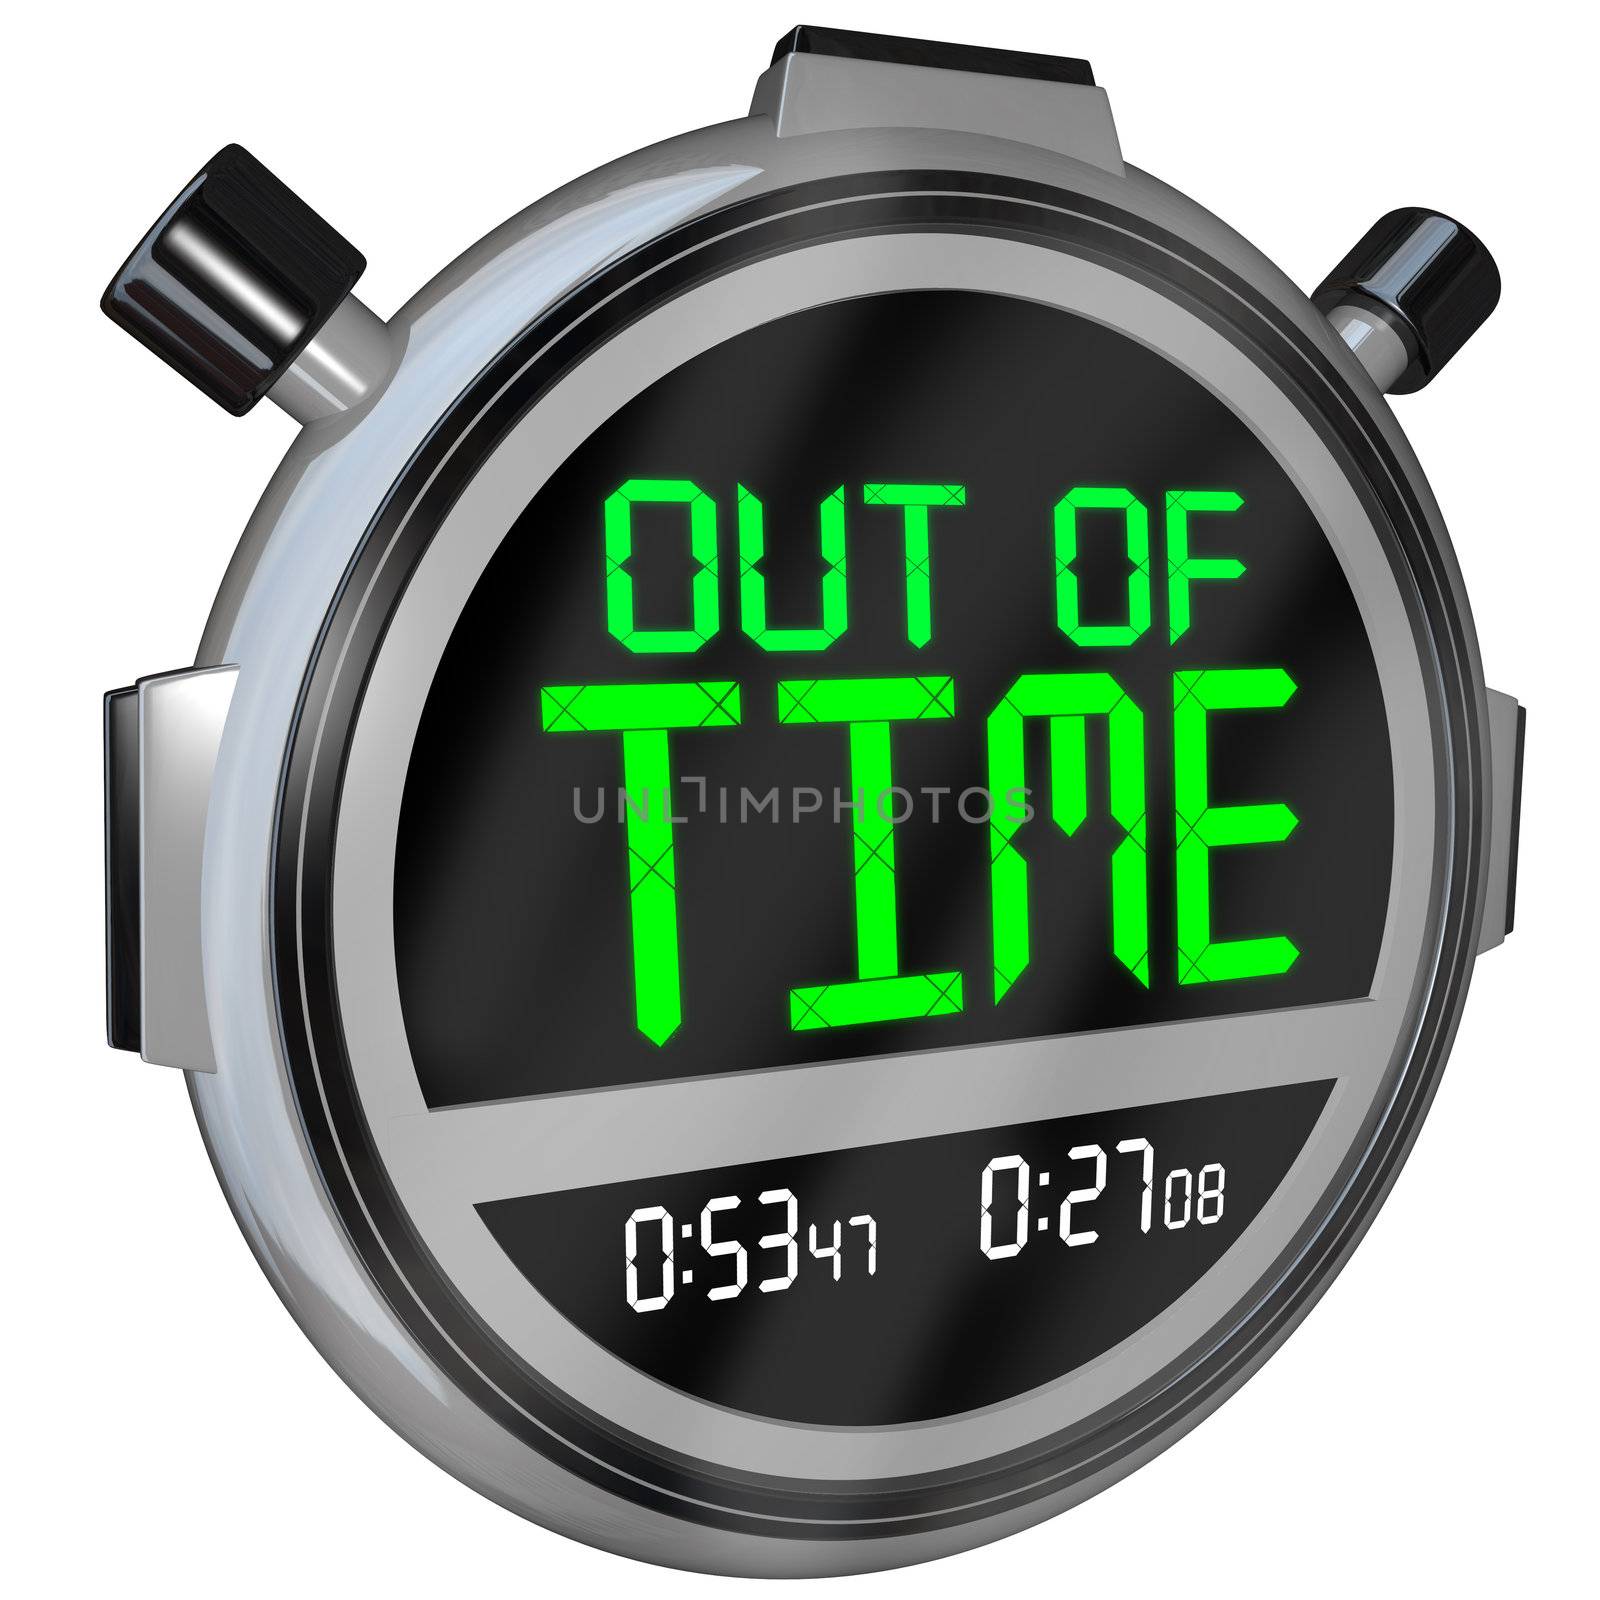 A stopwatch with the words Out of Time representing a deadline that is approaching or has passed and that you have run out of opportunity to complete or finish a test, project or sporting event